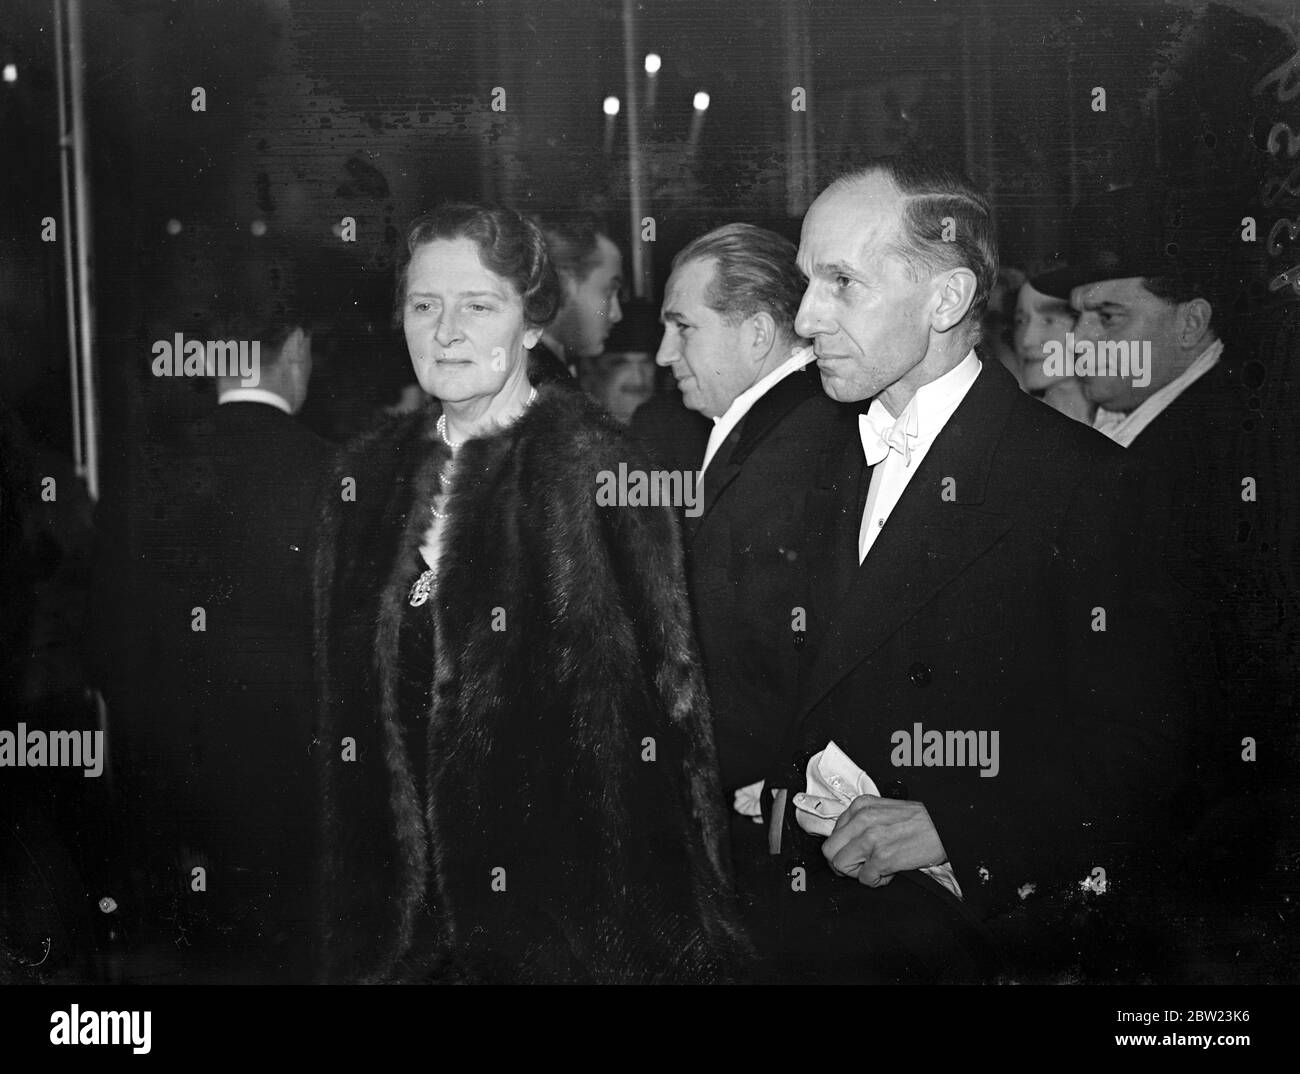 Canadian High Commissioner at Film Premiere. Charles Laughton's new film 'Vessel of Wrath', was given its premiere at the Regal, Marble Arch. Photo shows, Mr Vincent Massey, the Canadian High Commissioner, and his wife at the premiere. 24 February 1938 Stock Photo